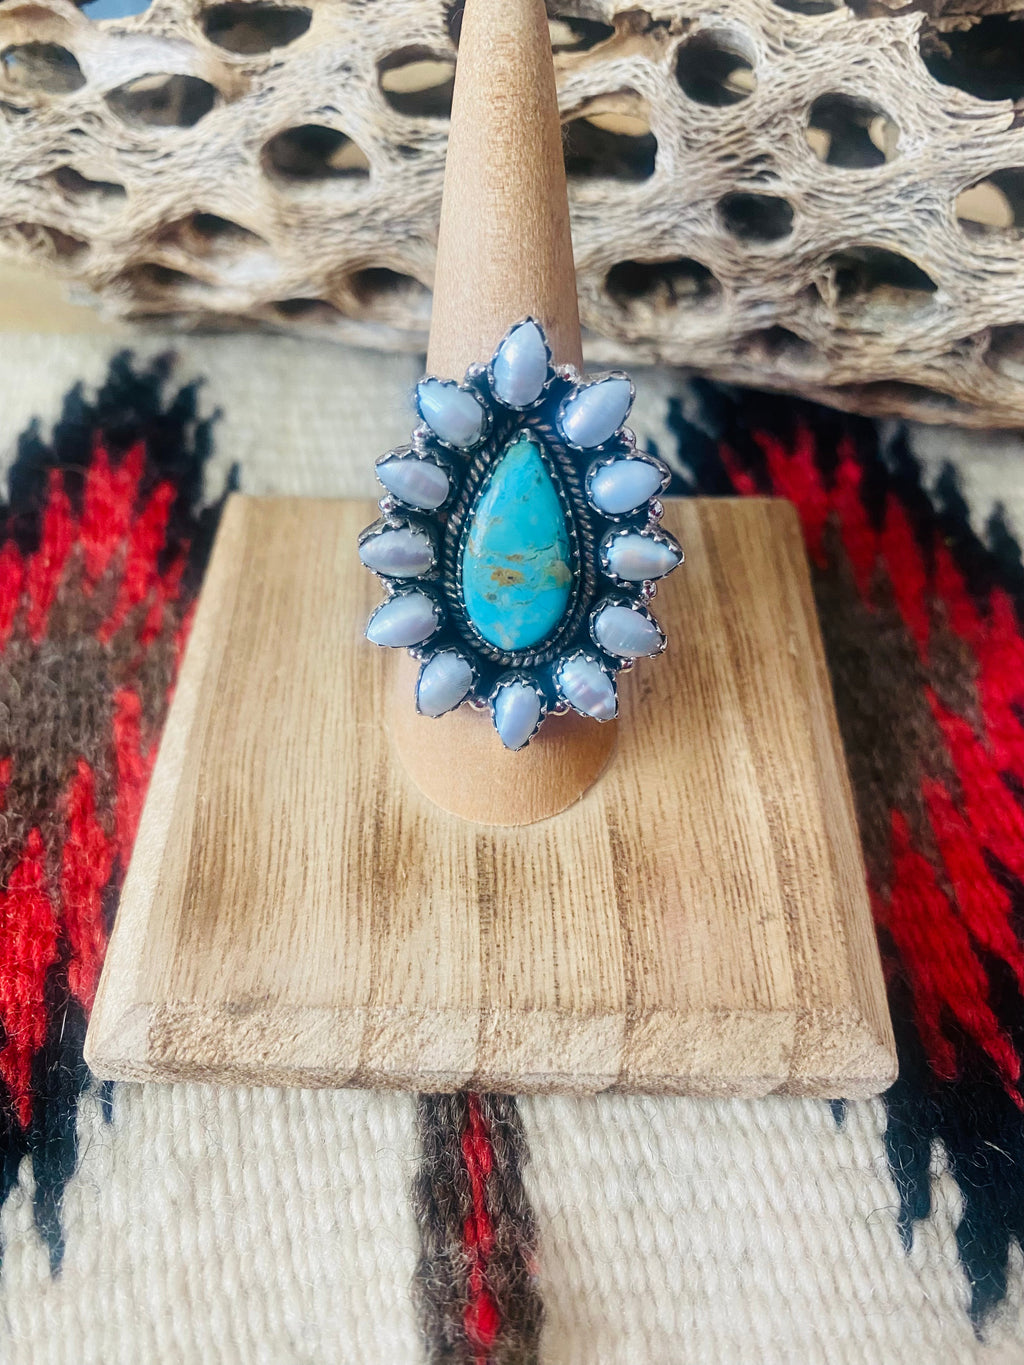 Handmade Sterling Silver, Turquoise & Pearl Cluster Adjustable Ring